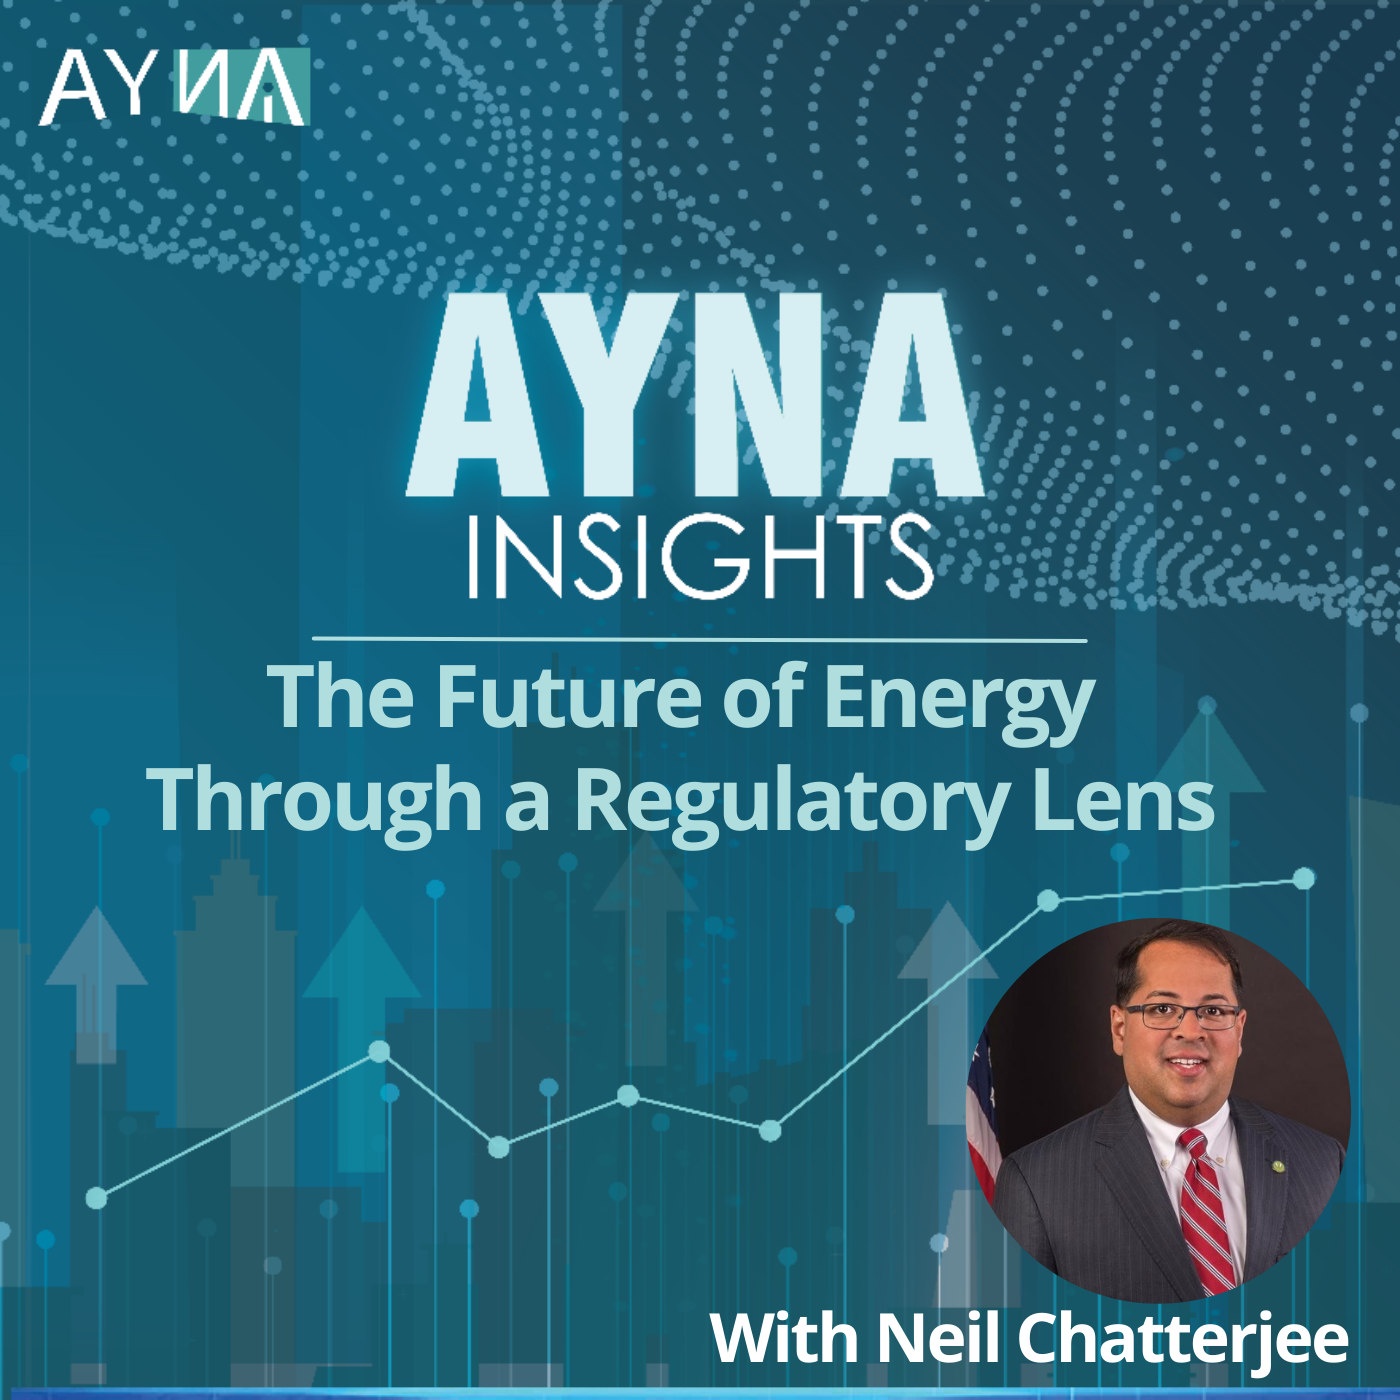 Neil Chatterjee: The Future of Energy Through a Regulatory Lens